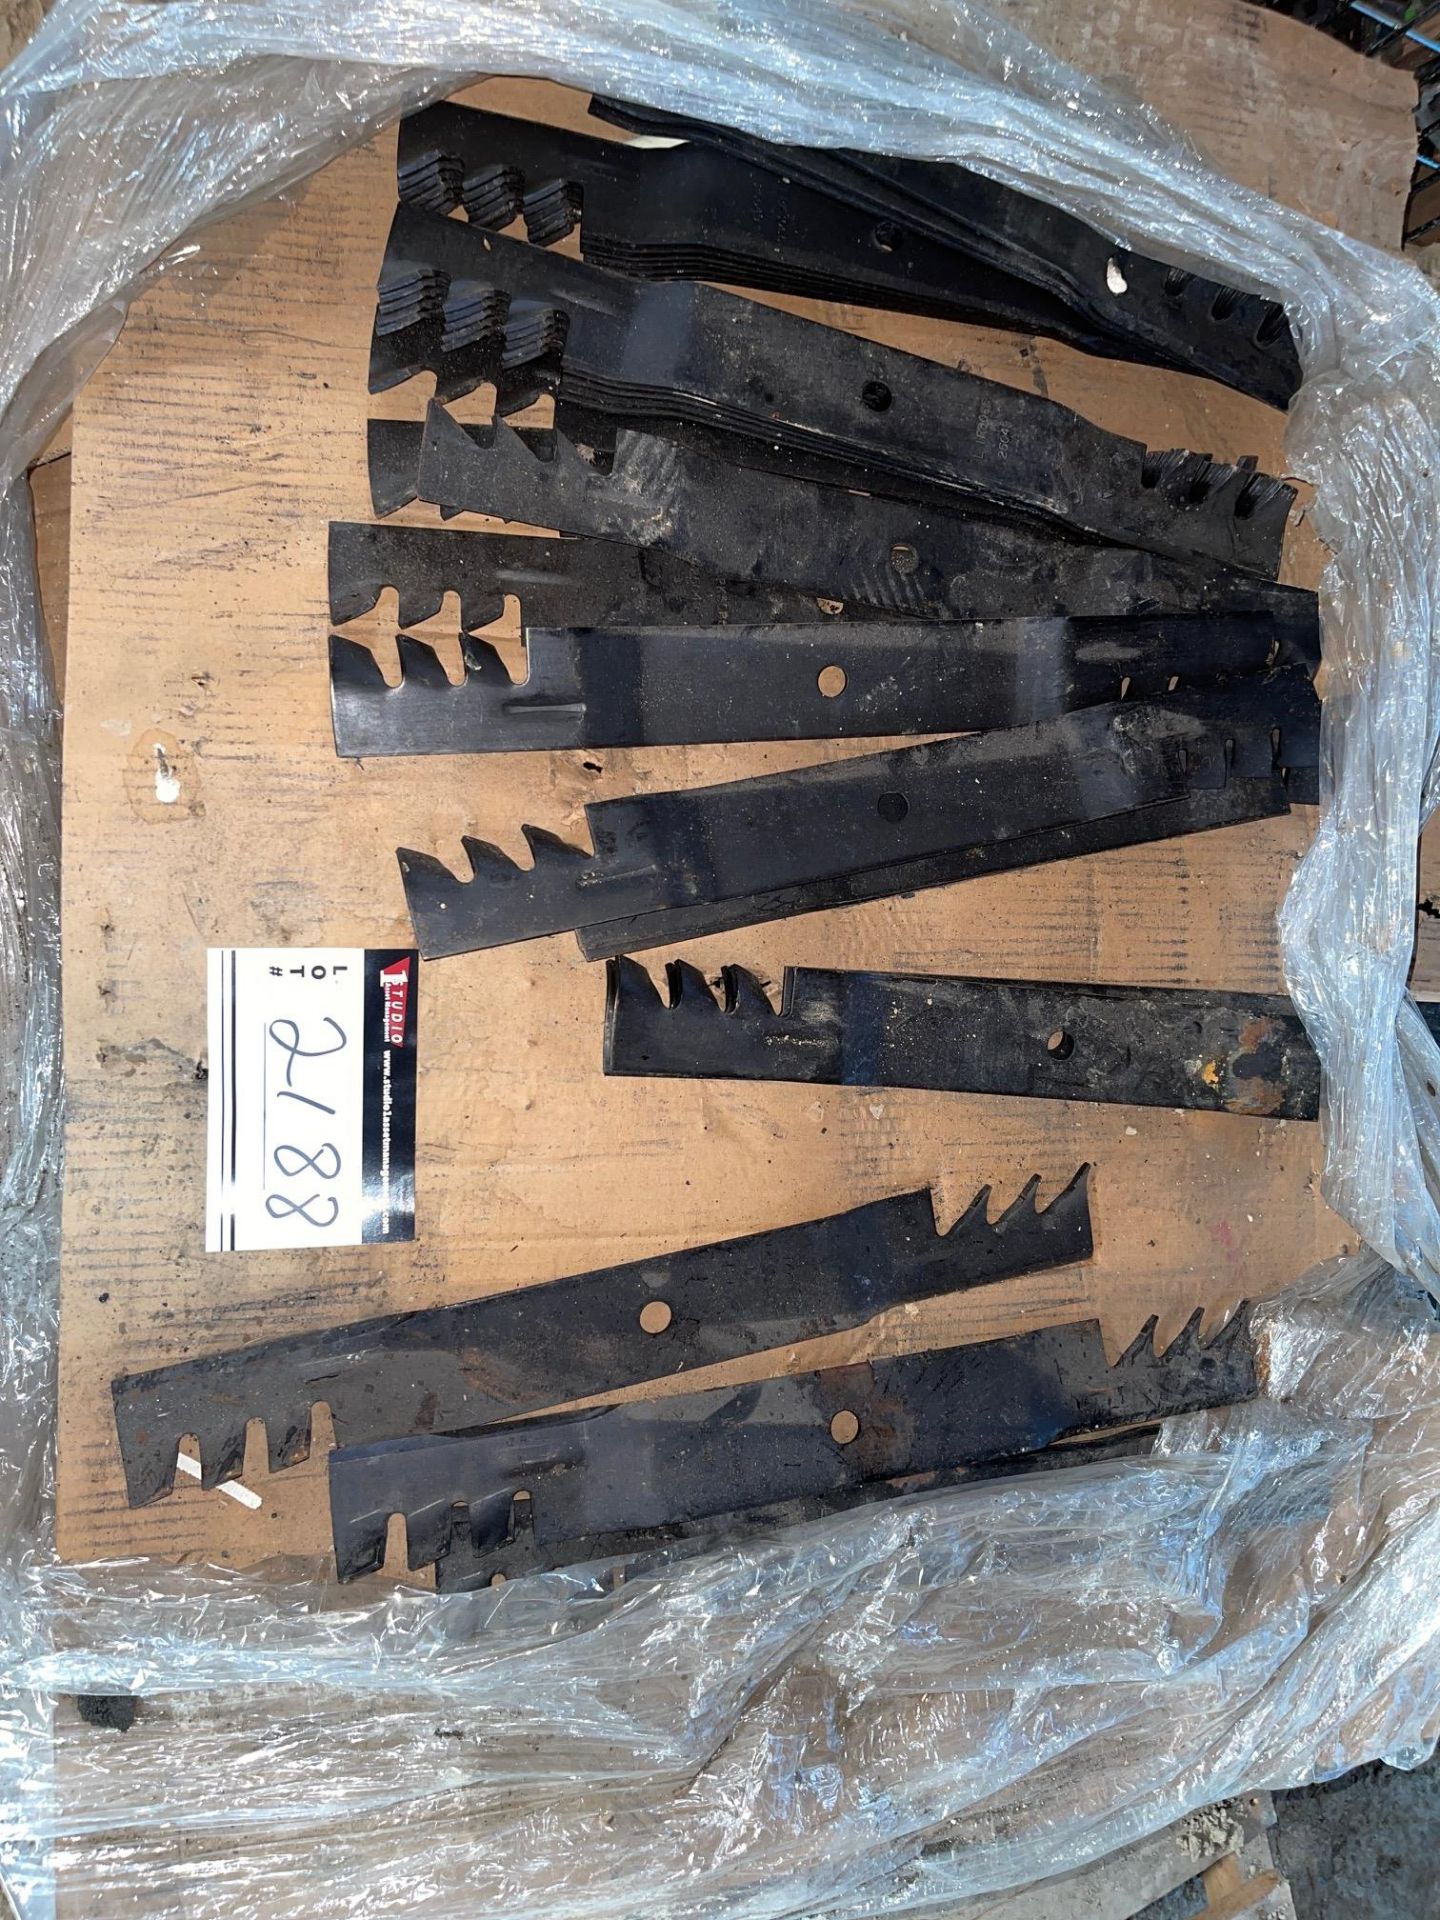 LOT OF XTREME LAWNMOWER BLADES, 21 1/2" WITH 5/8 HOLE, APPROX 1000, RIGGING FEE $25.00